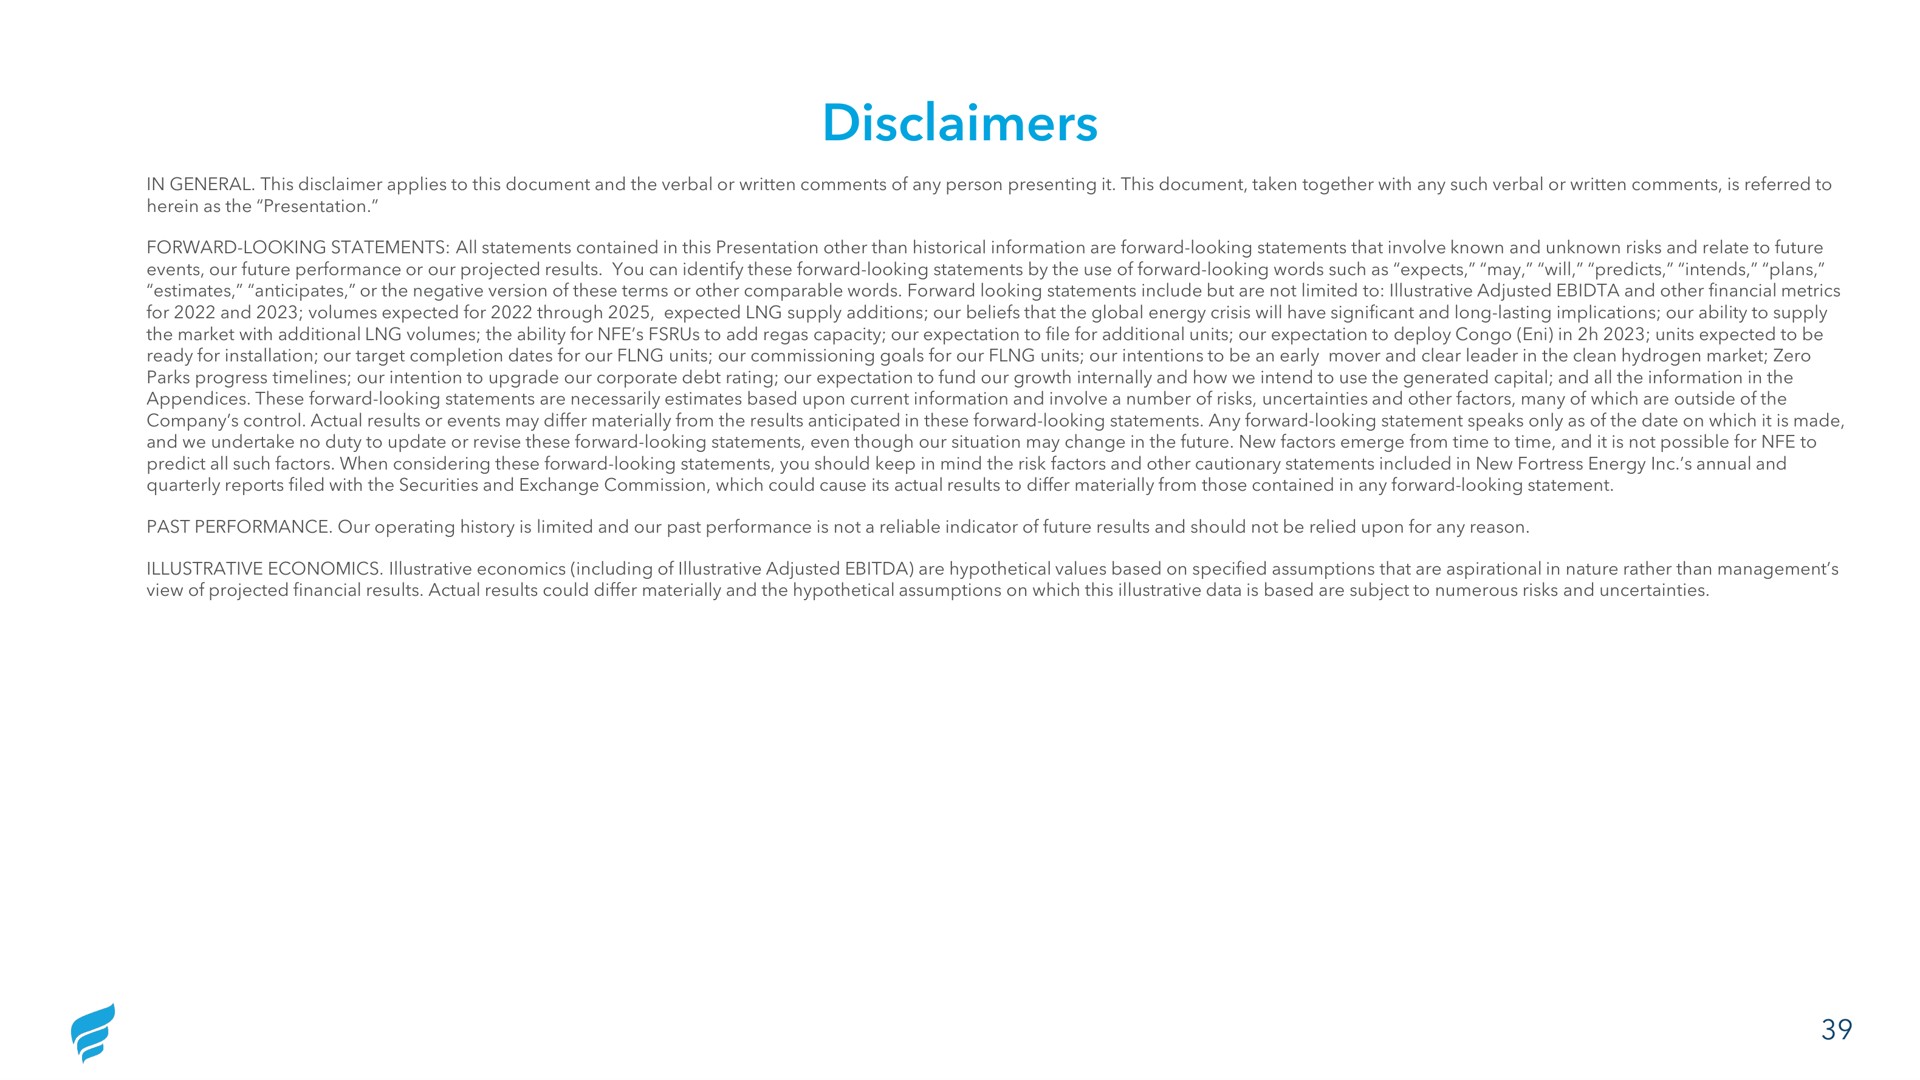 disclaimers | NewFortress Energy